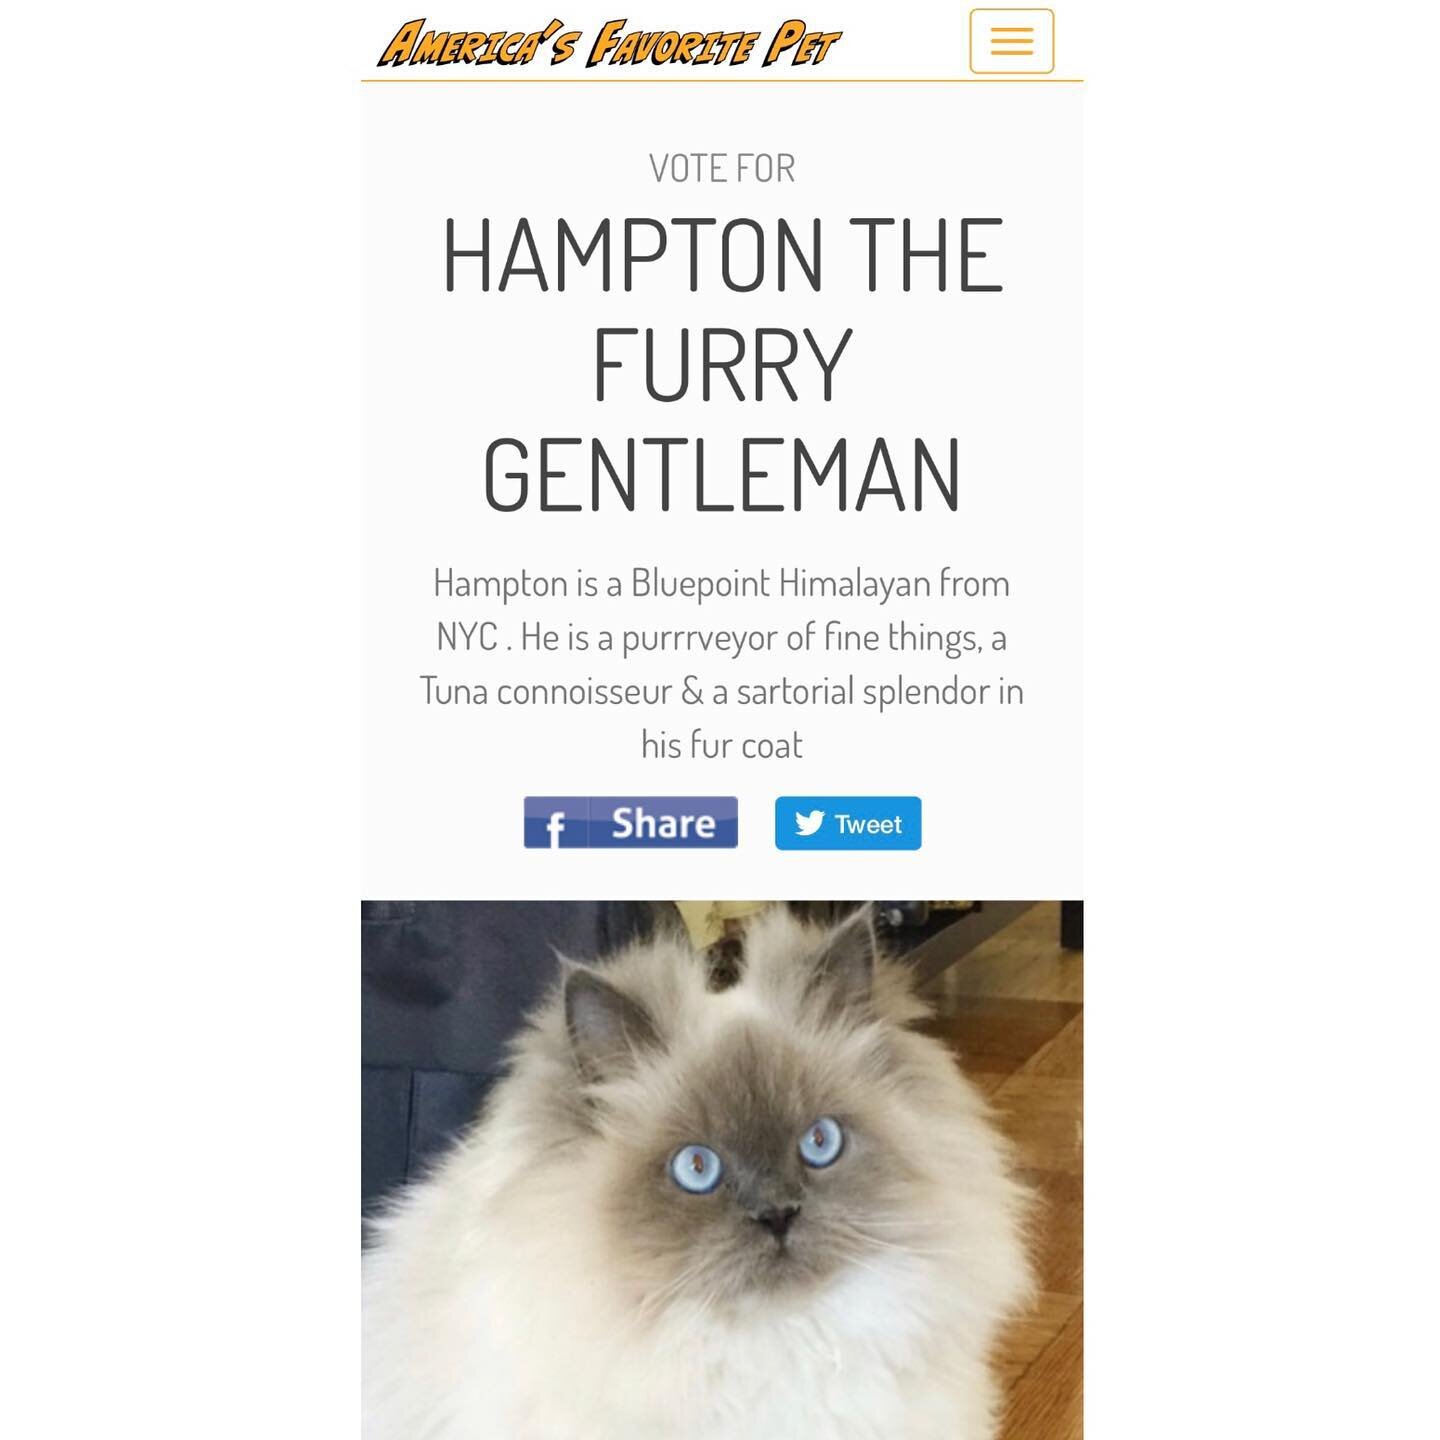 If you guys need a break from the news, politics &amp; other insanity these days, head over to the link in my bio! My cat @hampton_furry_gentleman has been nominated for &ldquo;America&rsquo;s Favorite Pet,&rdquo; and a chance to appear in Catster Ma